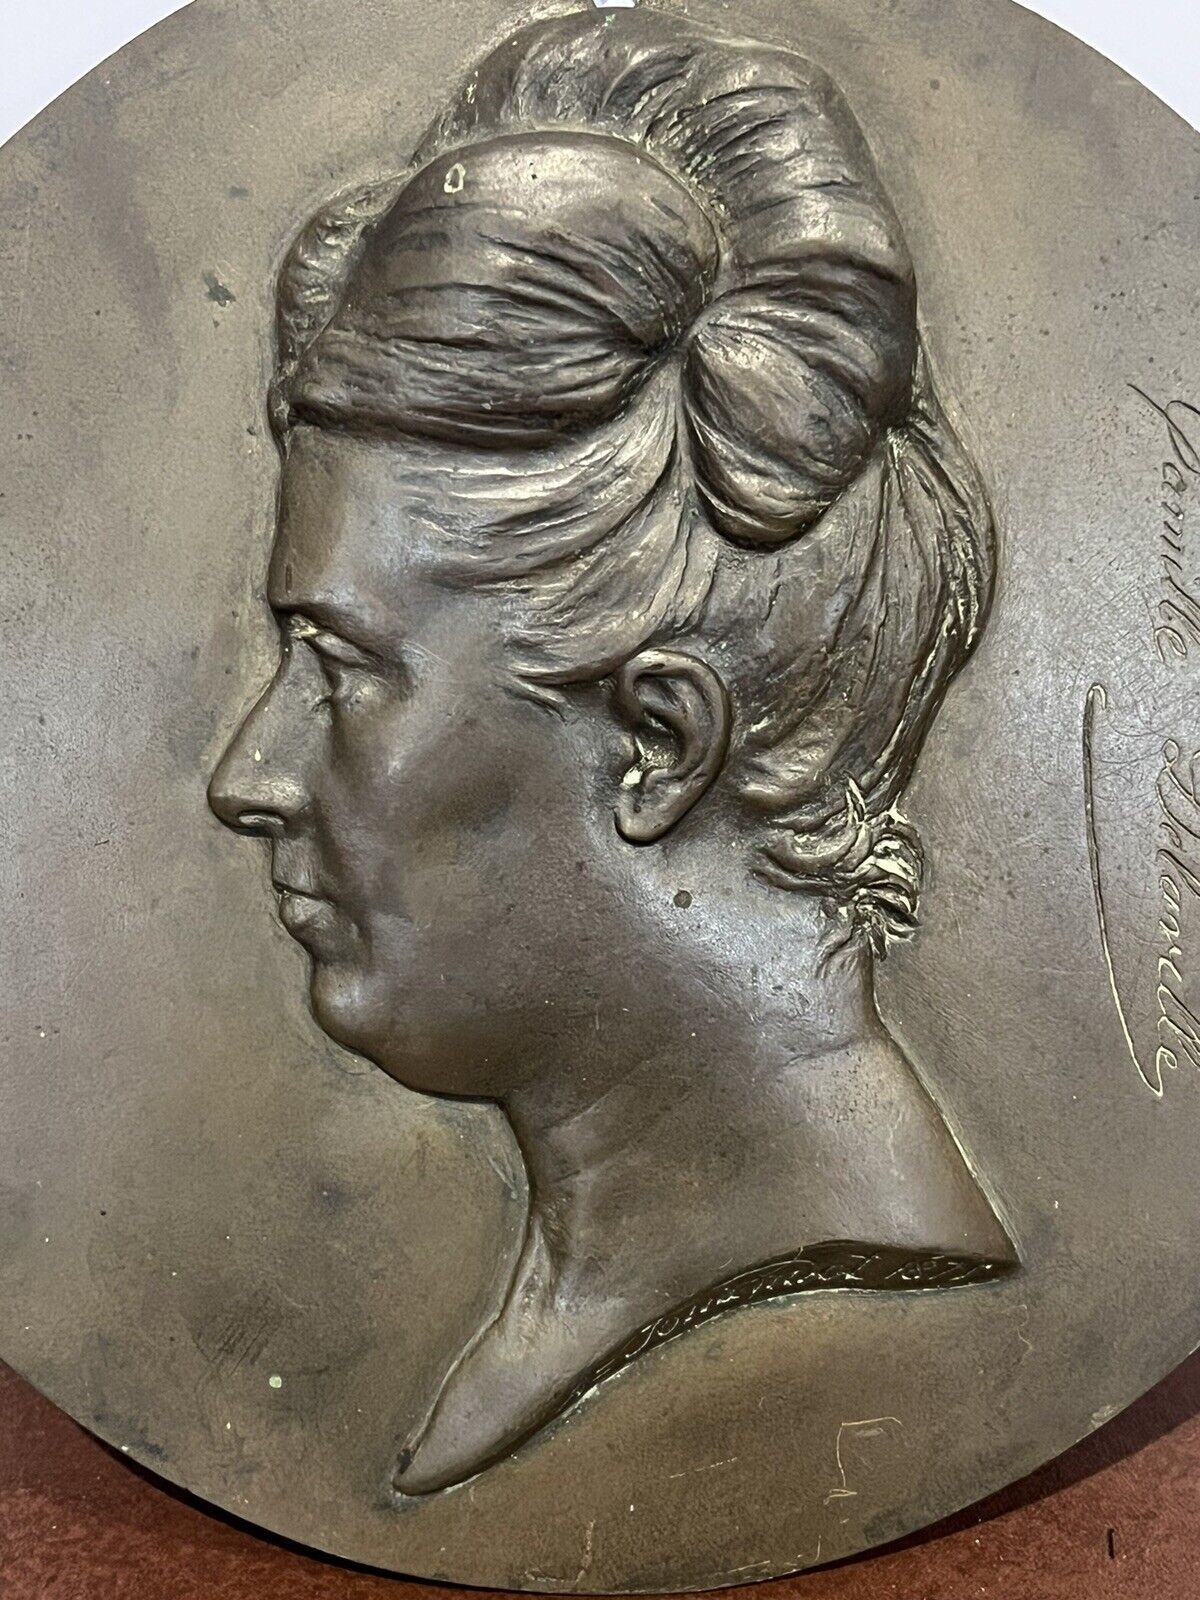 Bronze Plaque By A-Jouandot 1831-1884 Of Camille Delaville - Feminist 1838-1888.